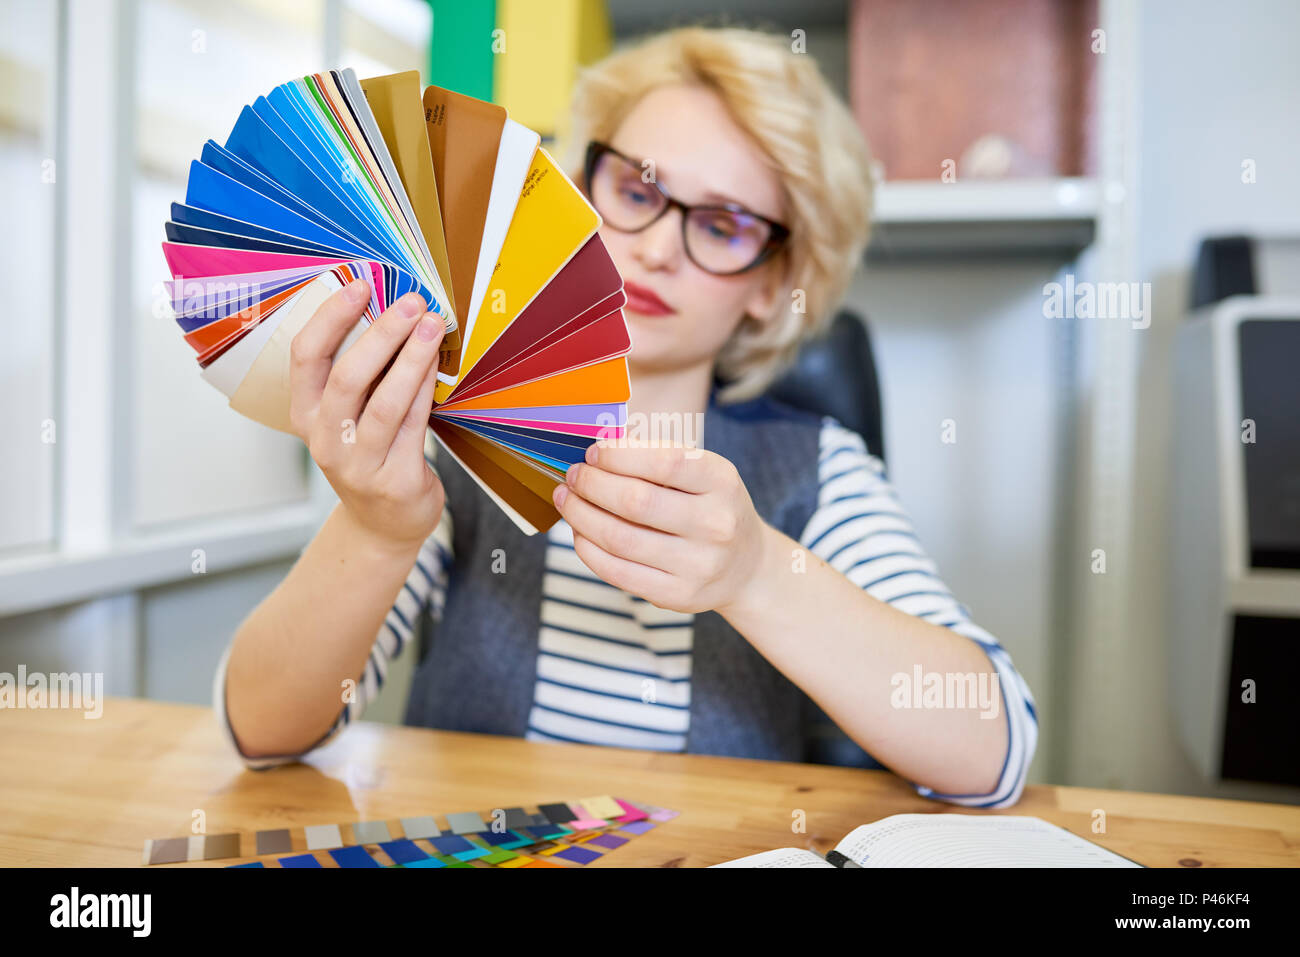 Designer looking at color samples Stock Photo